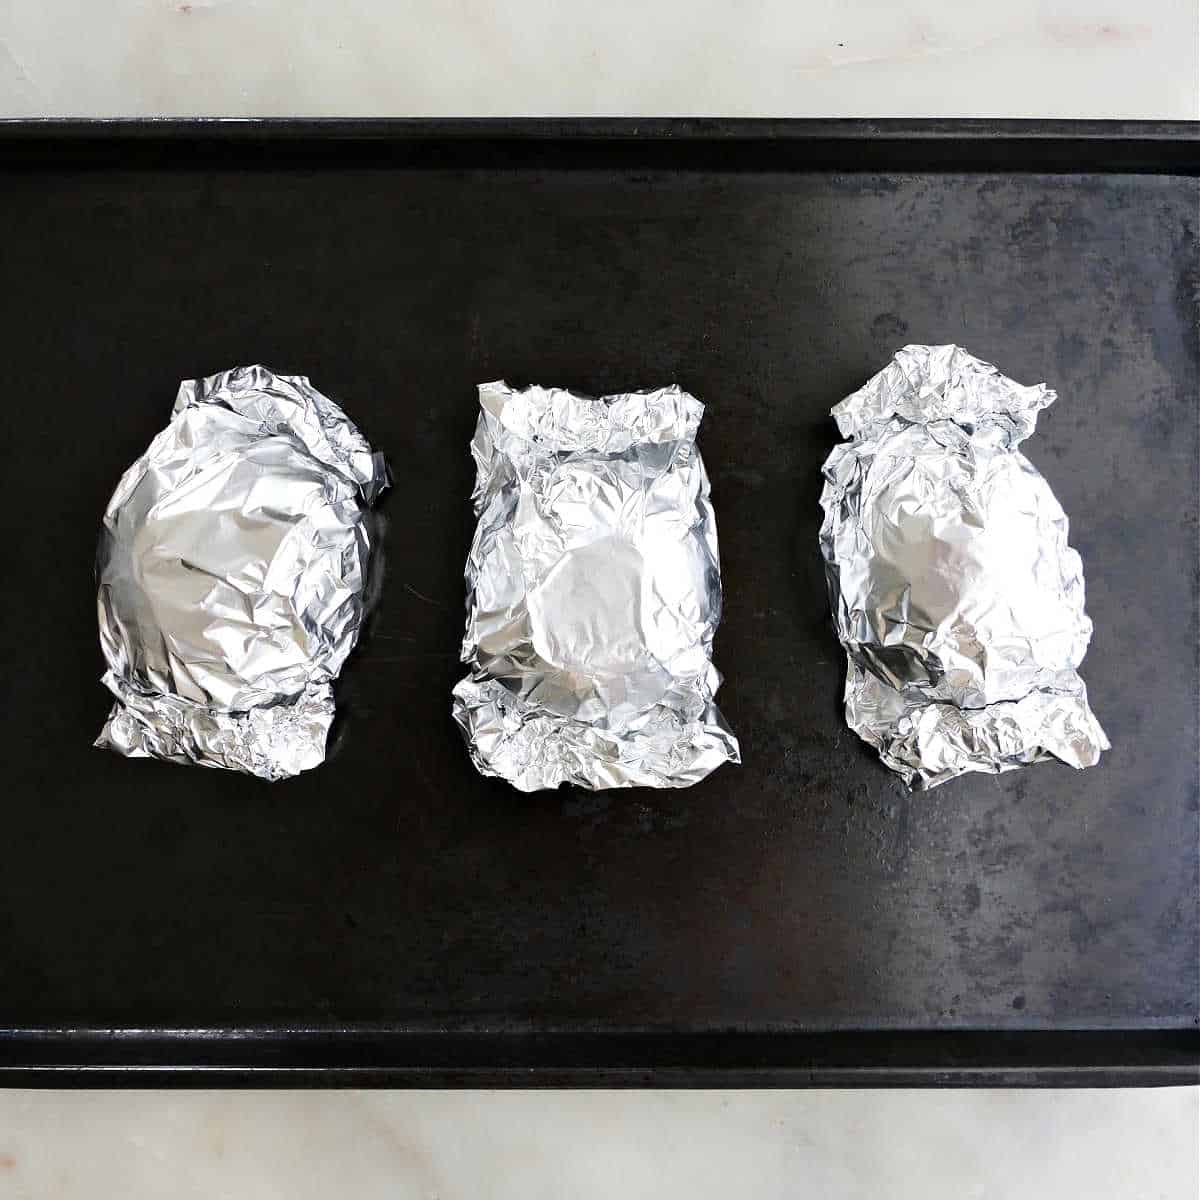 3 foil packets of beets prepared for roasting on a baking dish